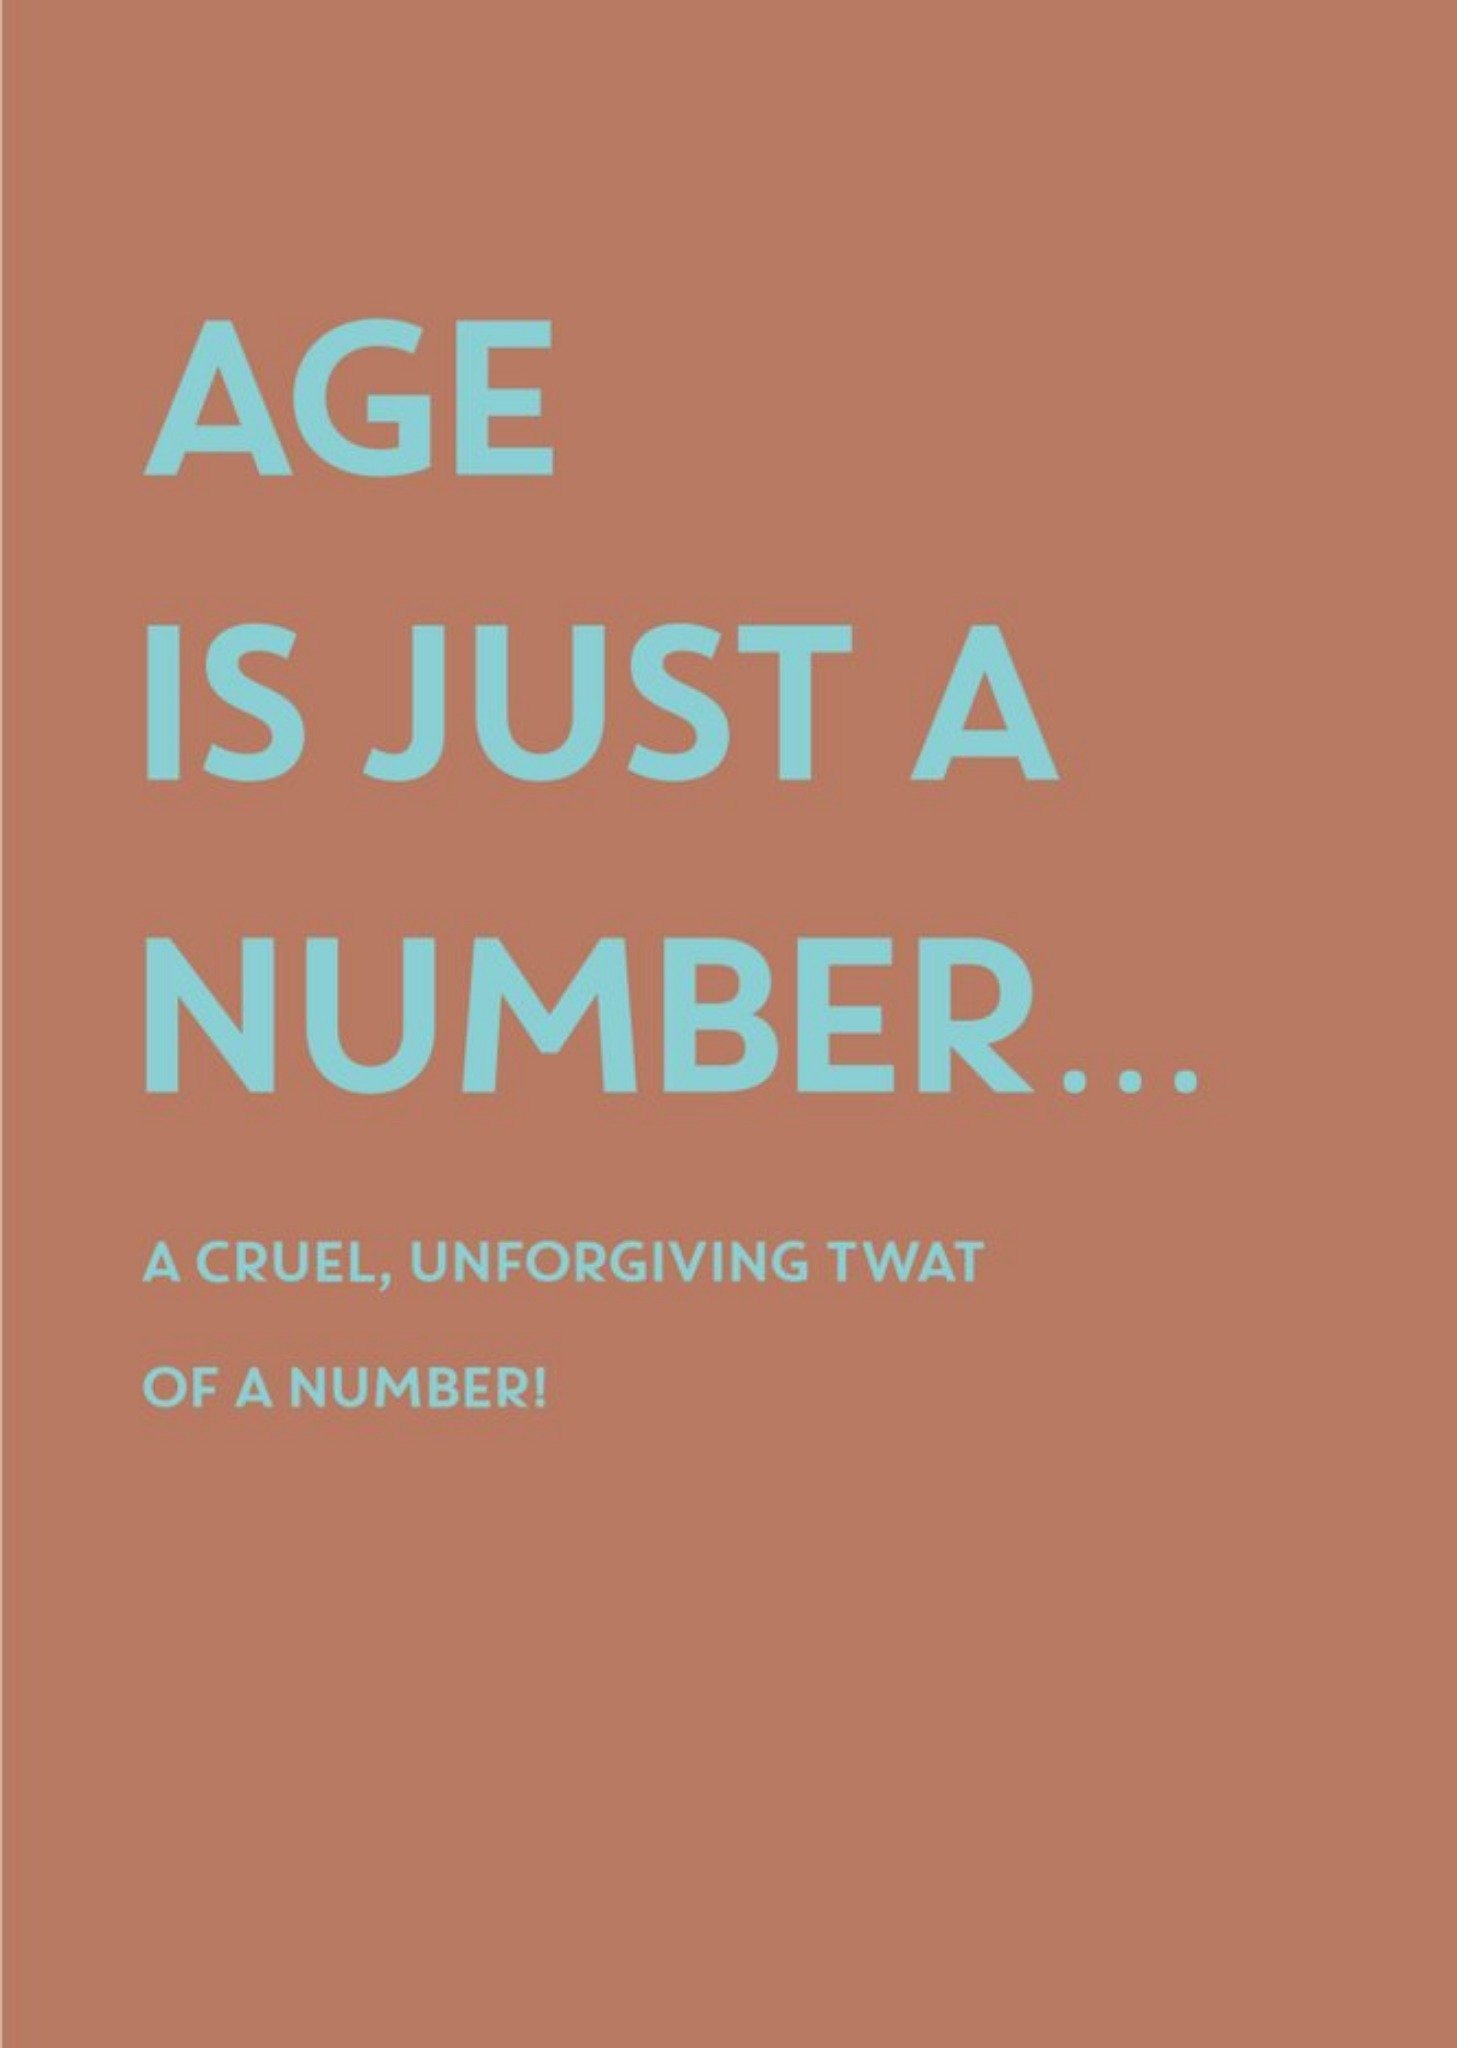 Moonpig Funny Age Is Just A Number A Cruel Unforgiving Twat Of A Number Birthday Card Rd Ecard